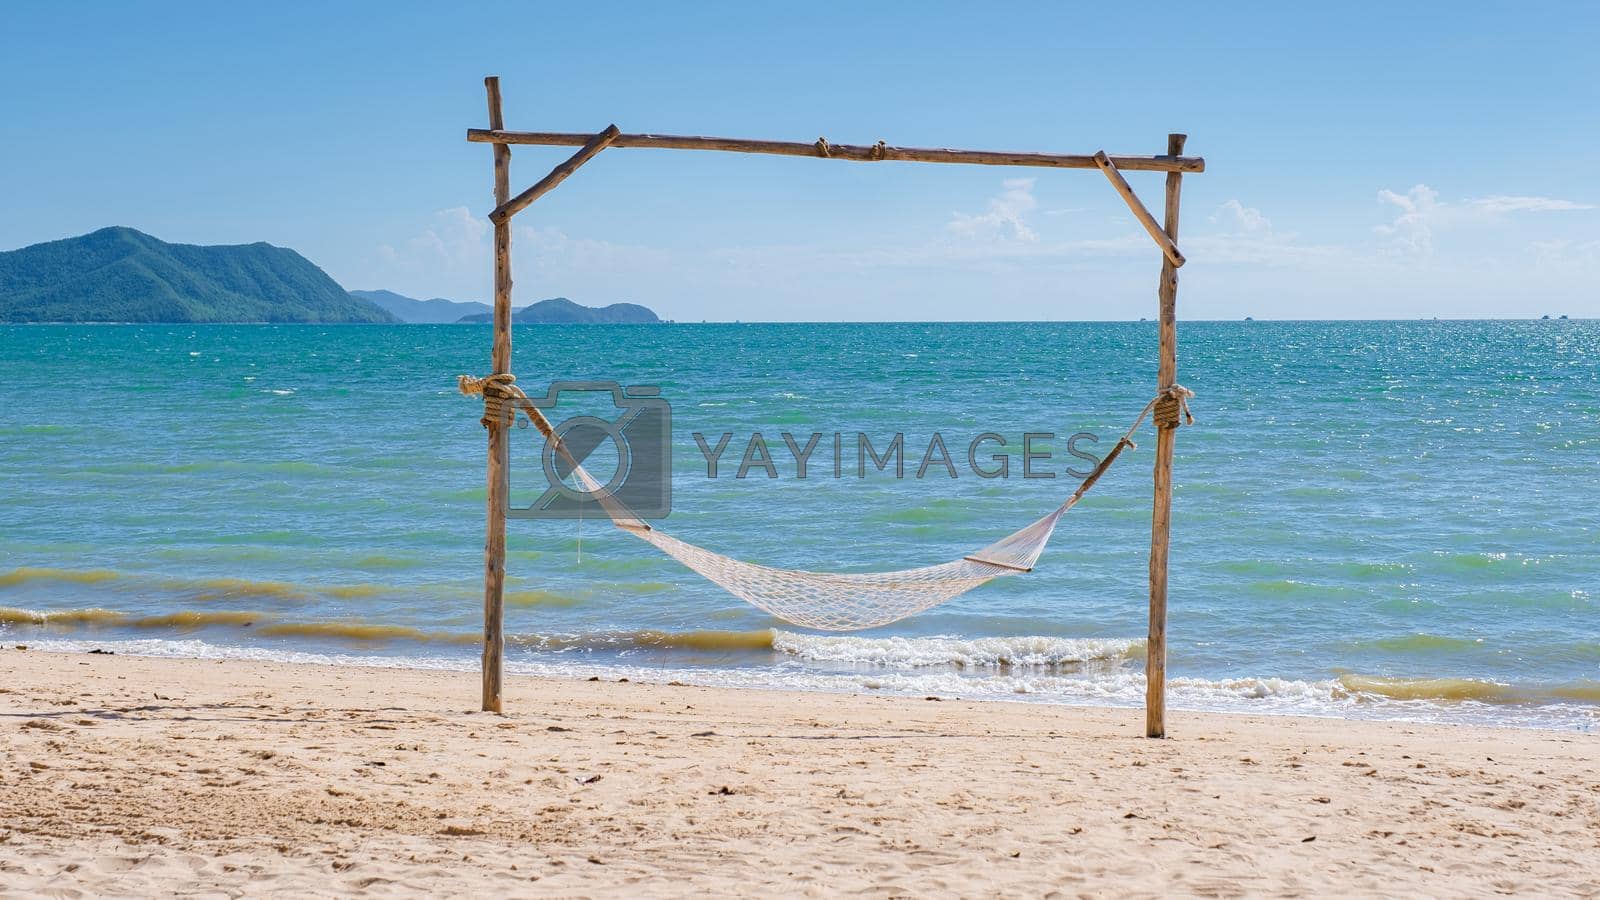 Royalty free image of Ban Amphur Beach Pattaya Thailand, beach with beautiful palm trees and a blue ocean in Pattaya by fokkebok